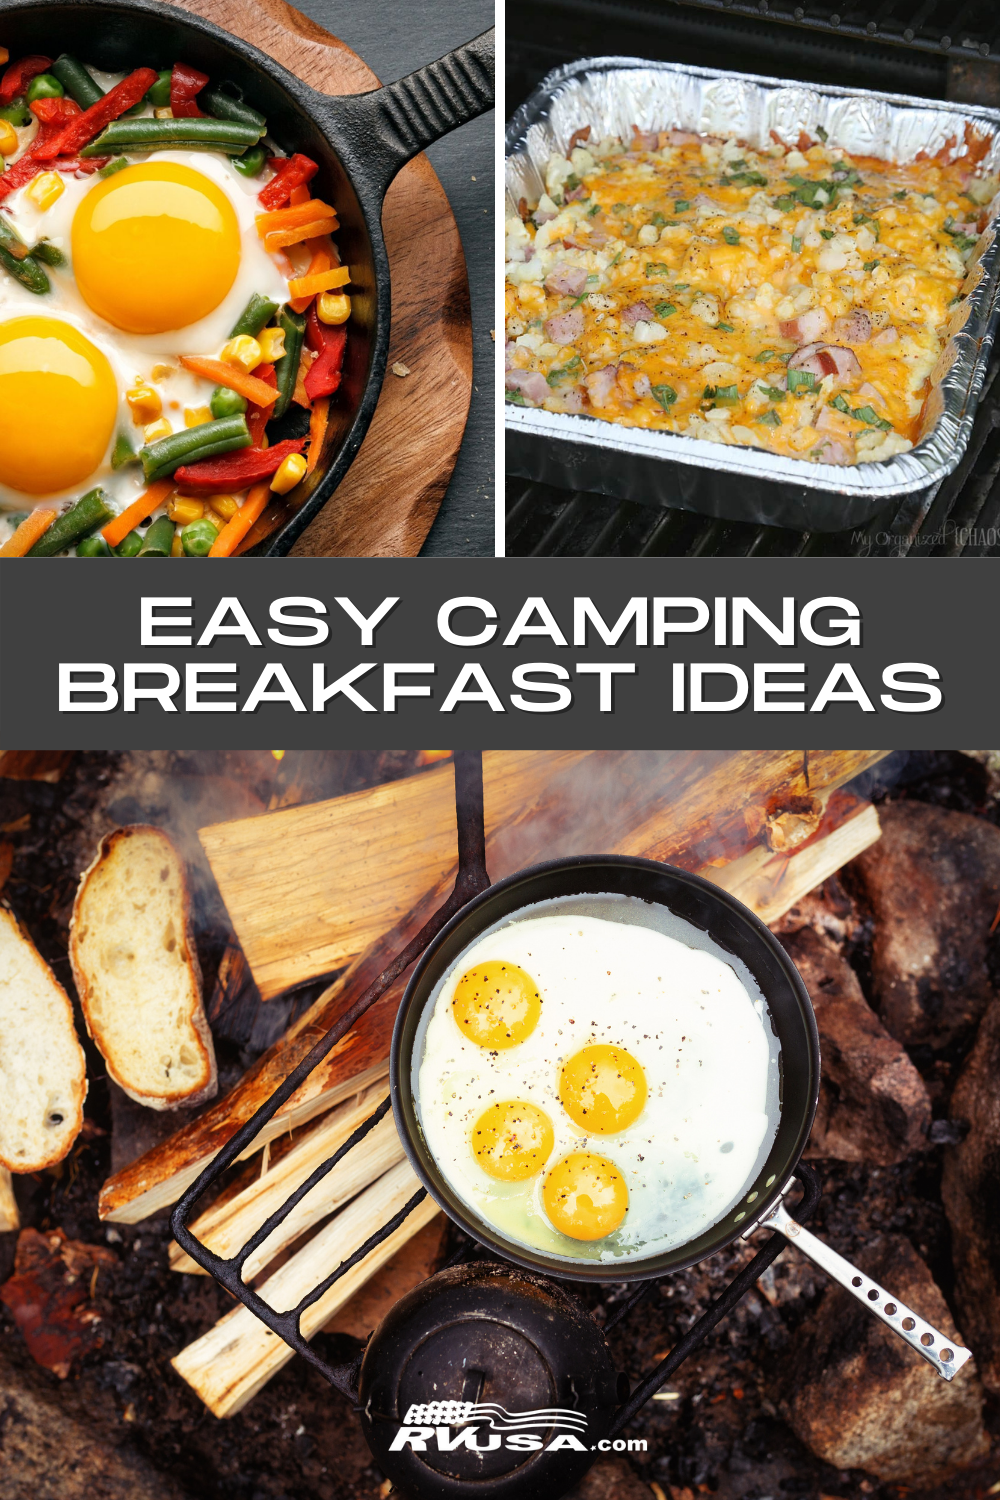 Images of breakfast being cooked over a campfire with the text "Easy Camping Breakfast Ideas"